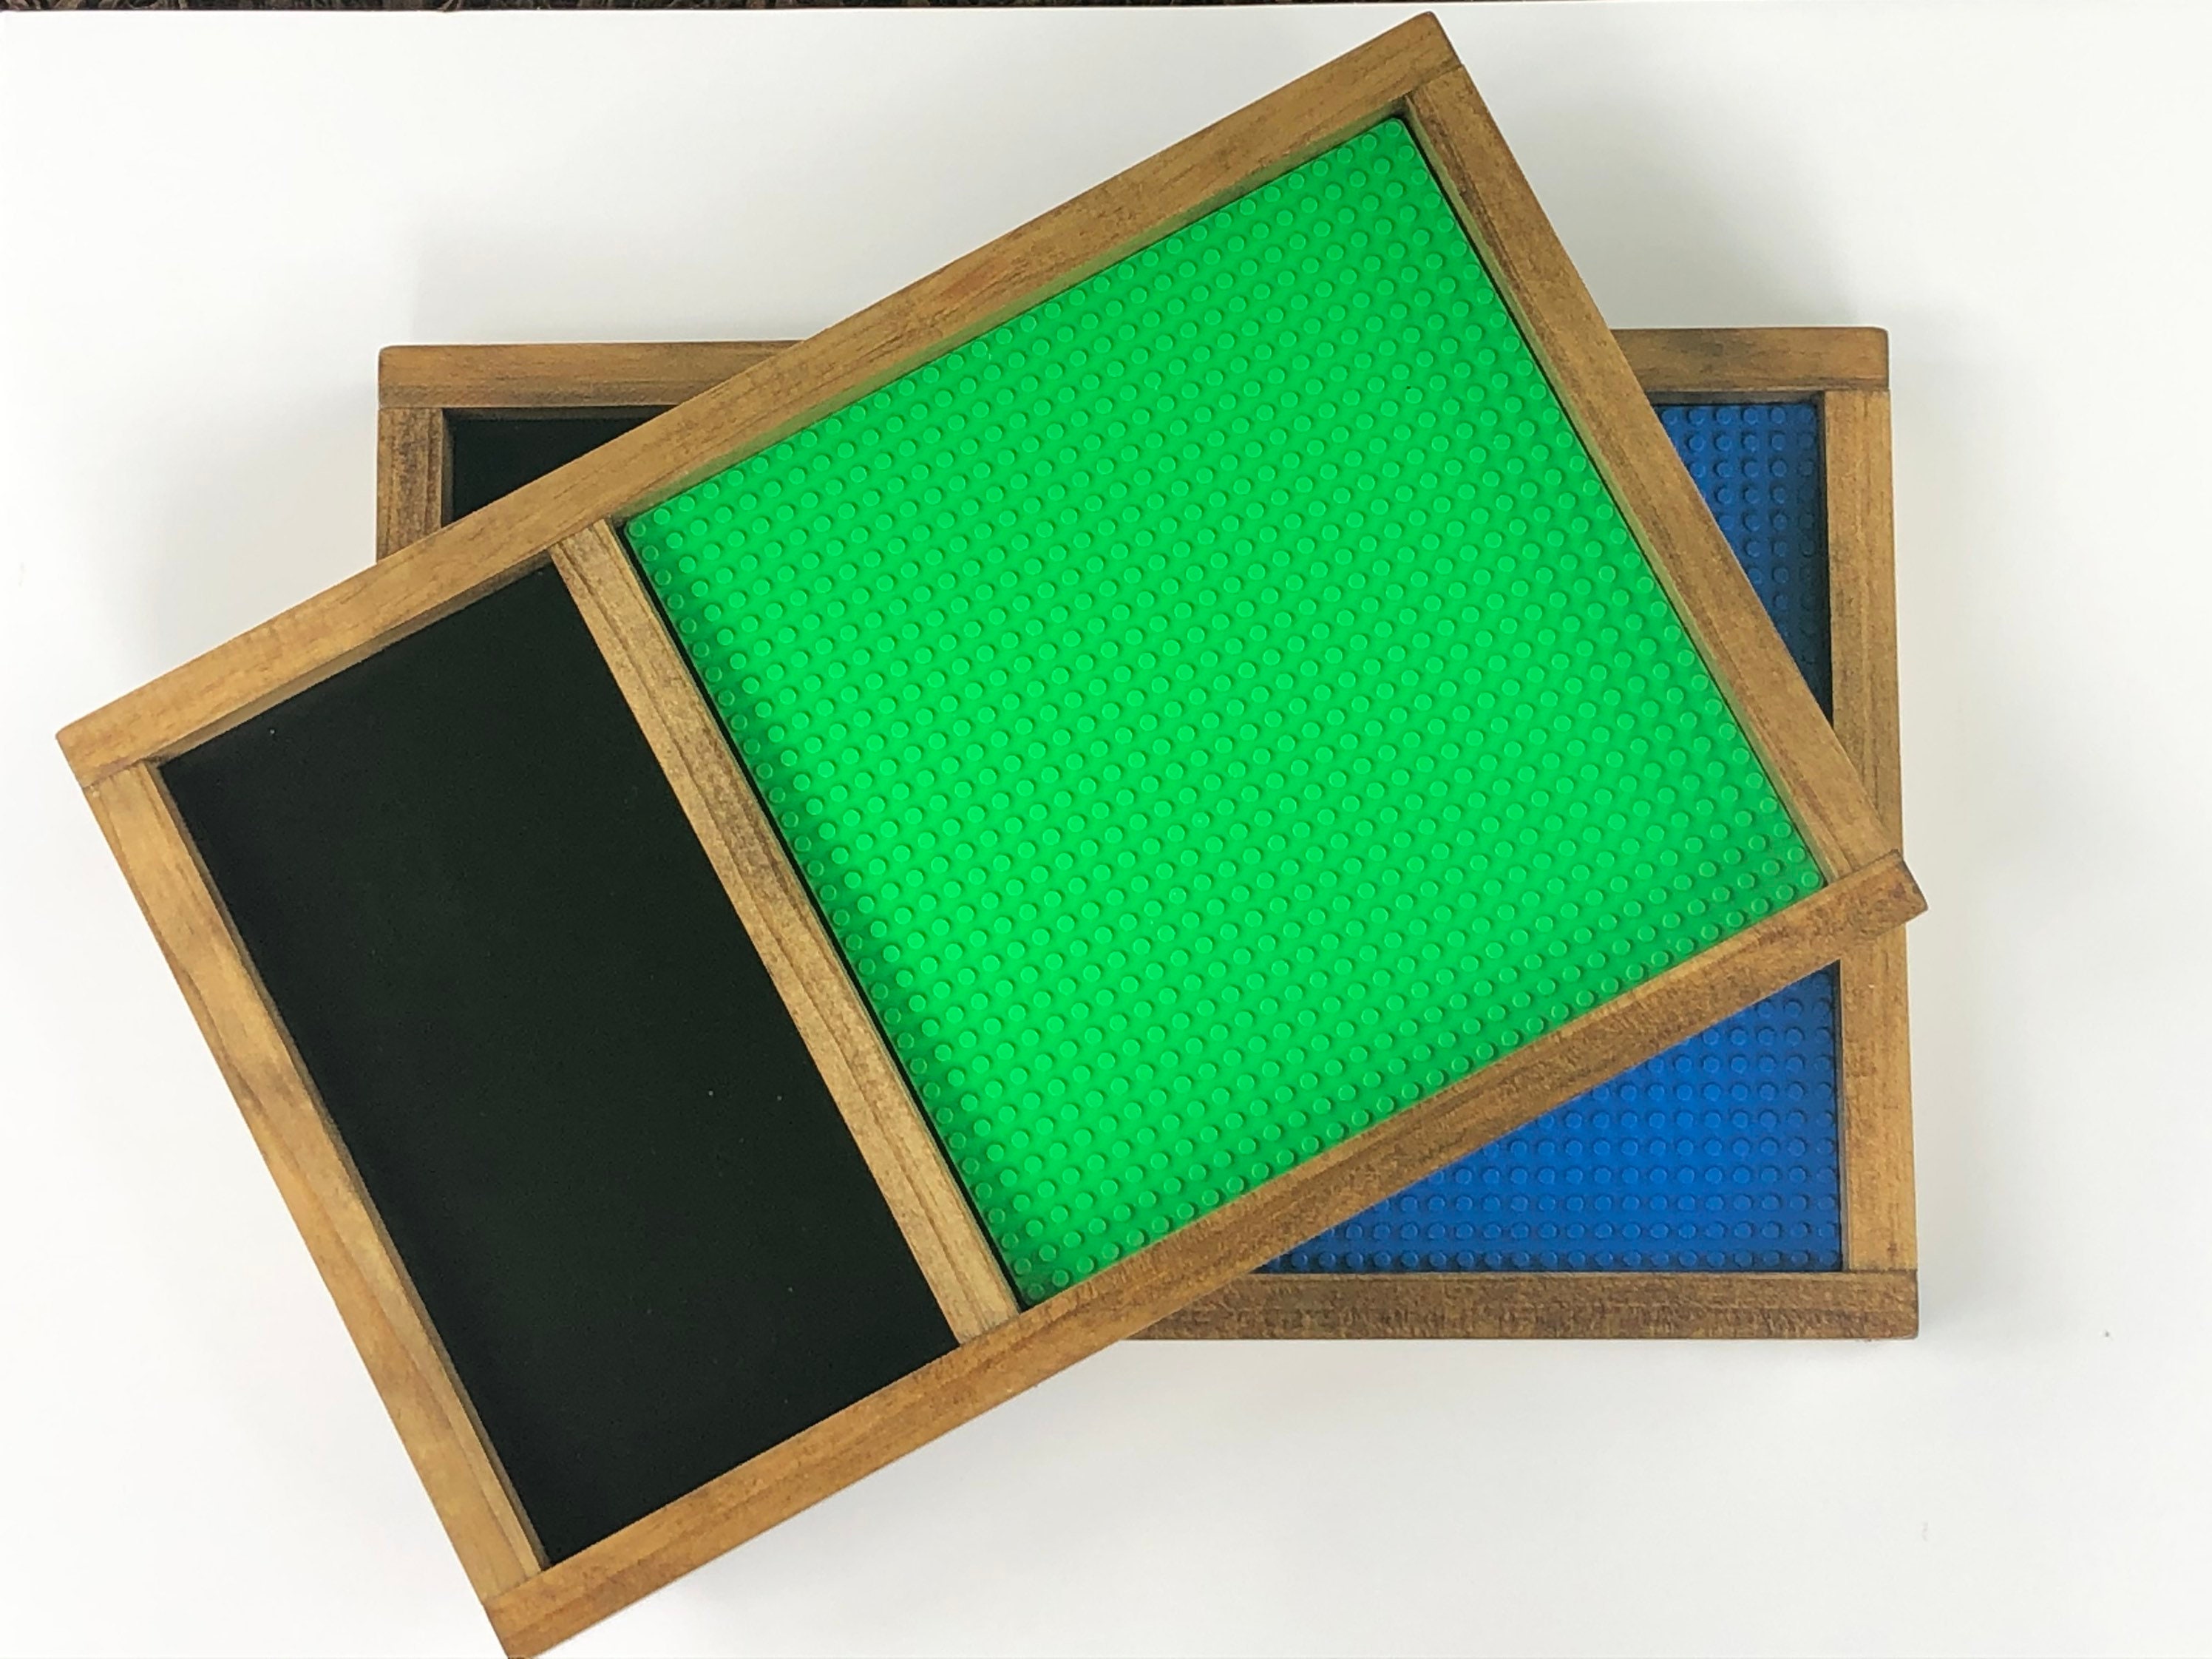  Building Block Tray with Green 10x20 Build Plate 12 x 22  Overall, Works with All Major Plastic Block Brands : Handmade Products